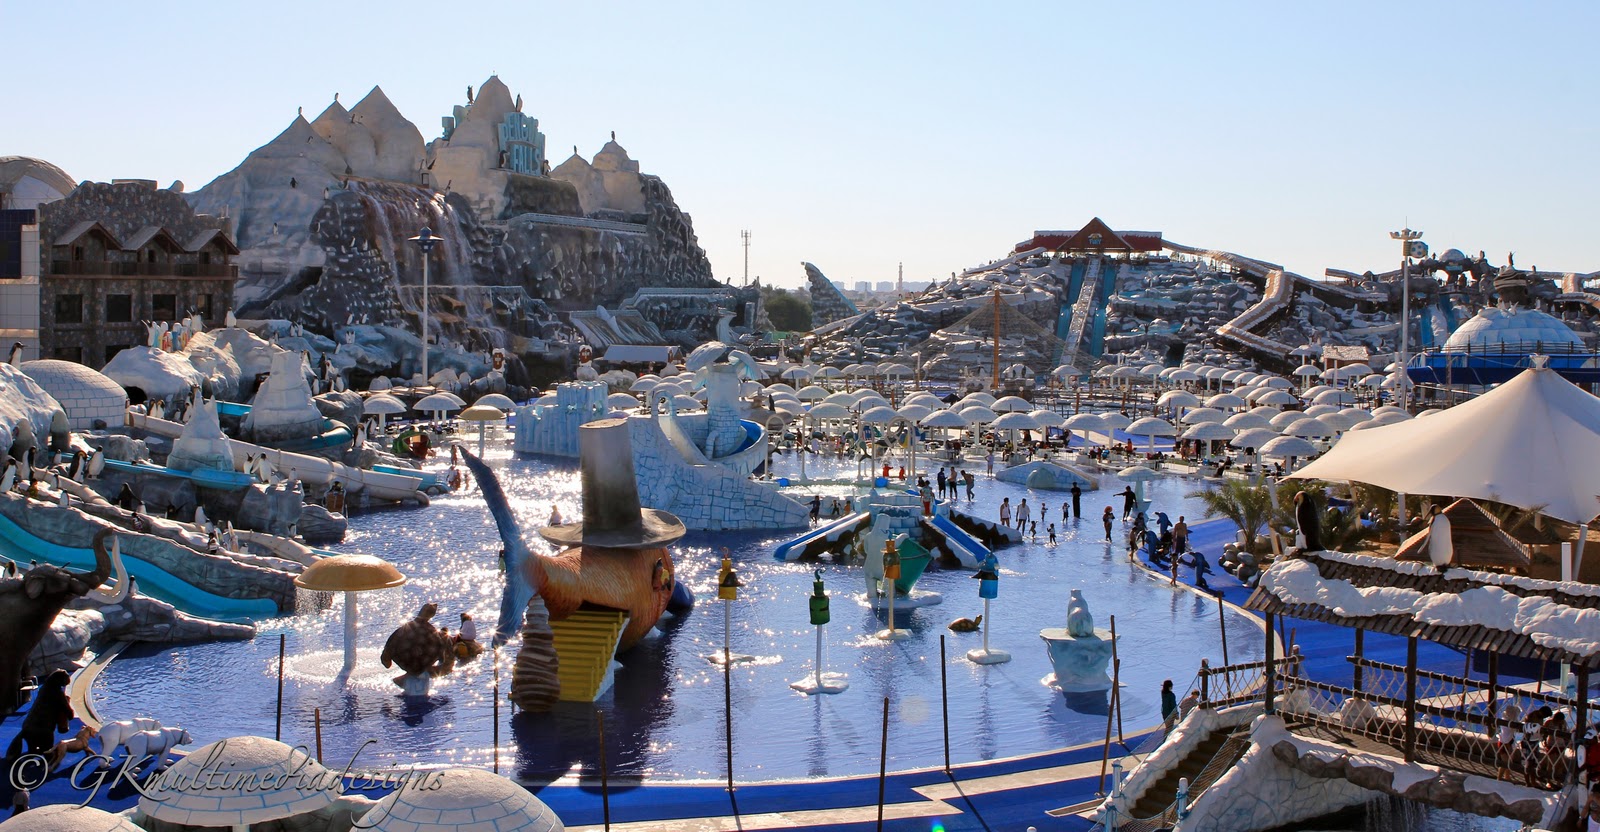 ice-land-water-park